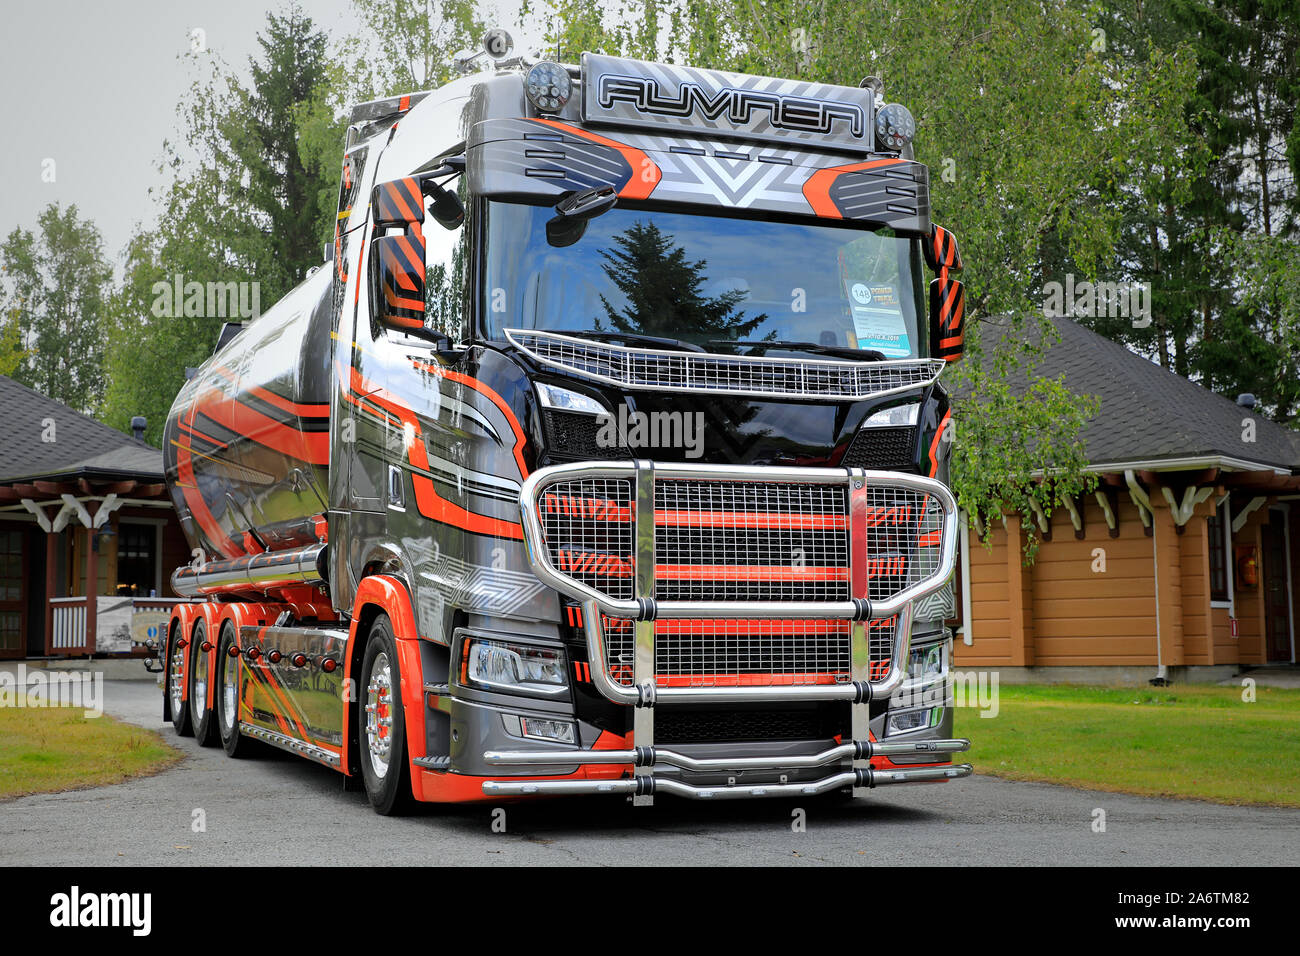 New Scania S650 truck 2019 for bulk transport of Kuljetus Auvinen Oy, Finnish company famous for super trucks. Alaharma, Finland. August 9, 2019. Stock Photo